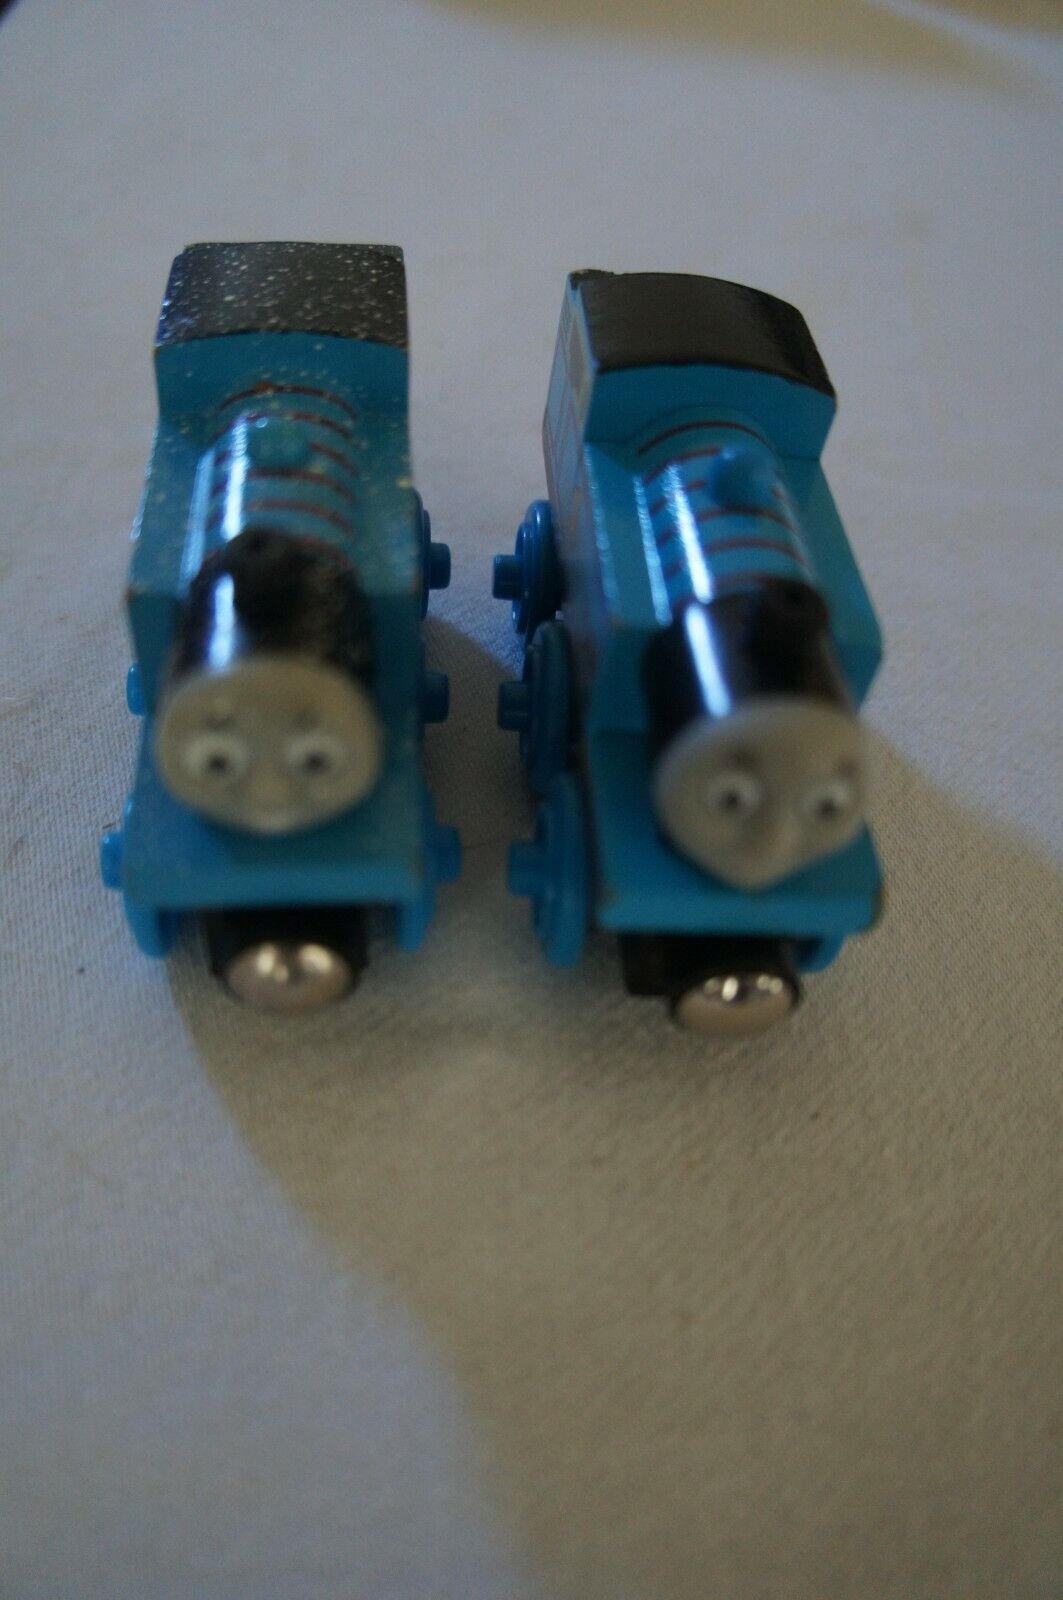 Thomas & Free shipping on posting reviews Holiday wooden engines Brio FREE SH Product - Compatible